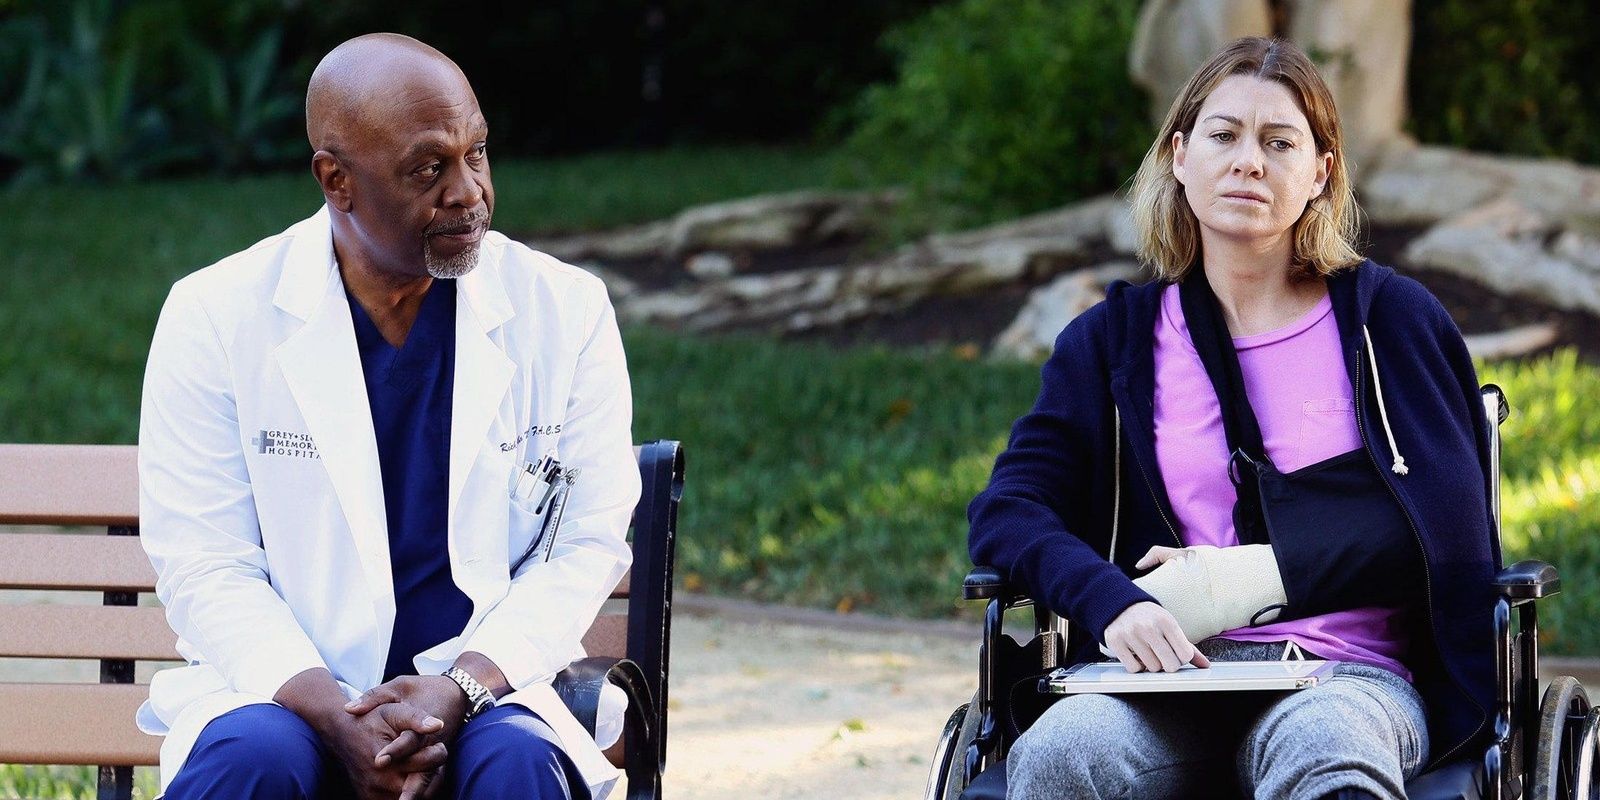 Richard and Meredith sitting together outside on Grey's Anatomy